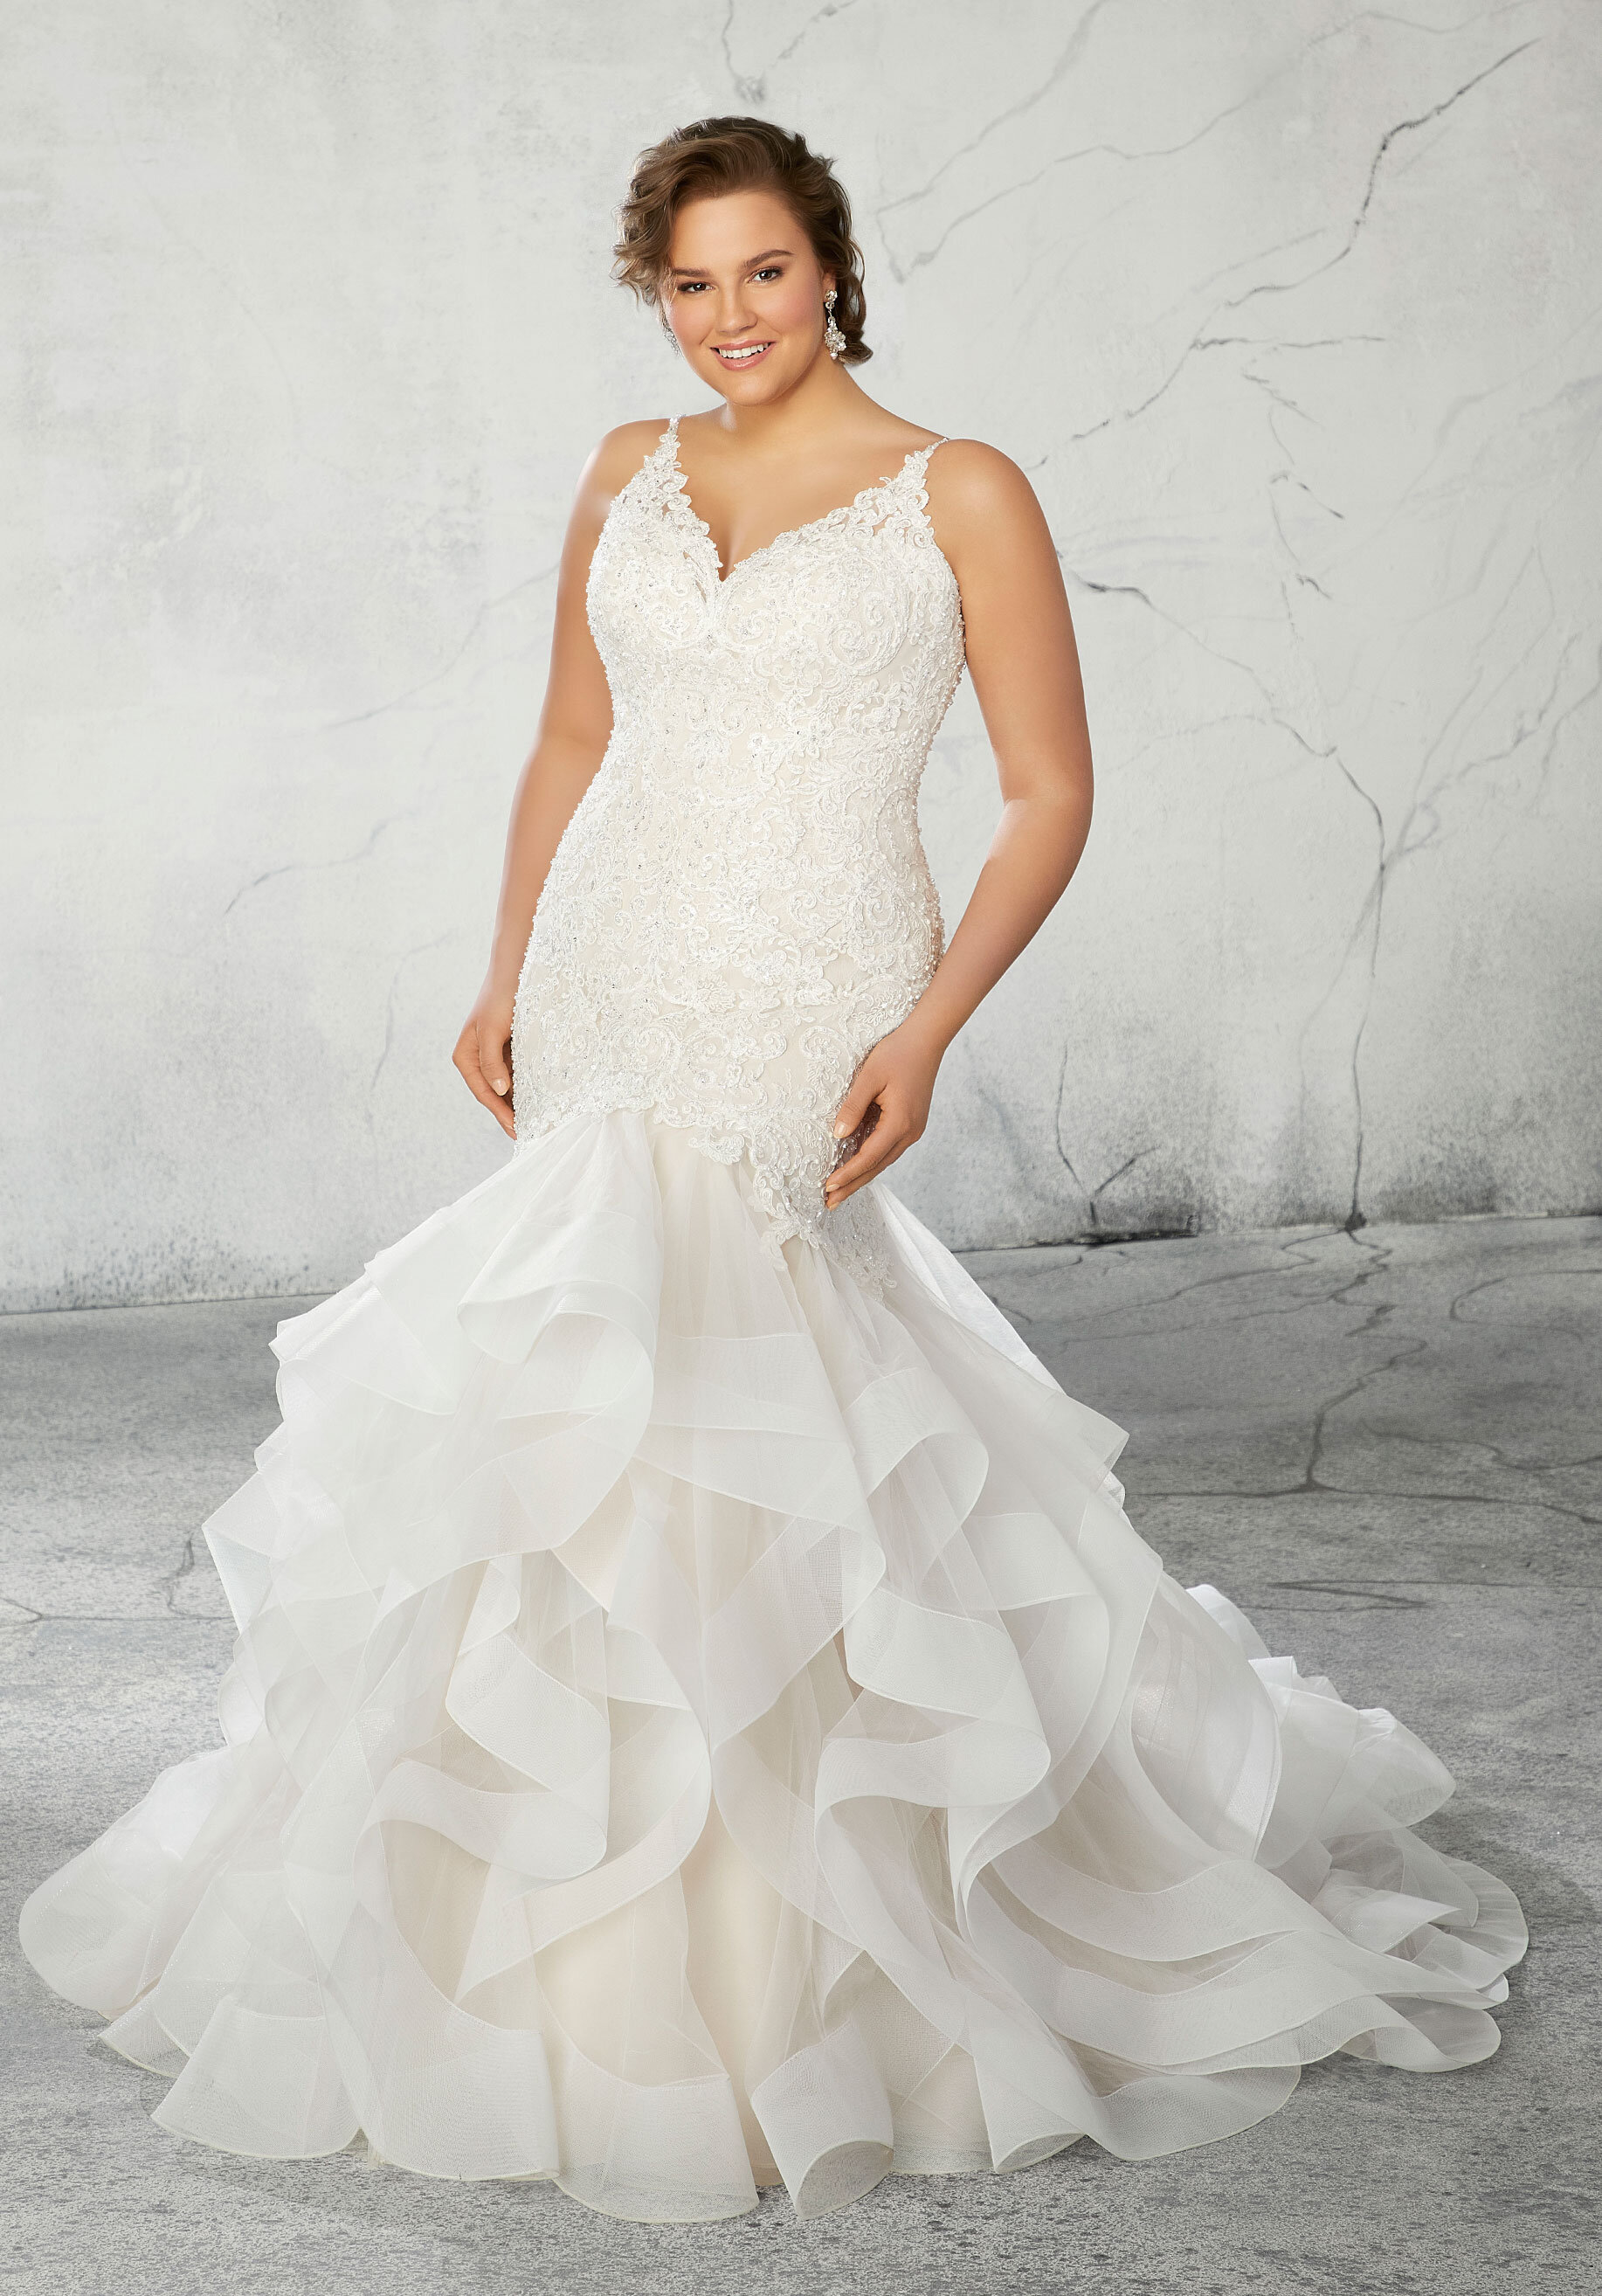 Brides-by-Young-Curvy-Plus-Size-Bridal-Chicago-Illinois-Indianapolis-Indiana-New-Jersey-Wedding-Dress-Morilee-3271-Raquel-Front.jpg